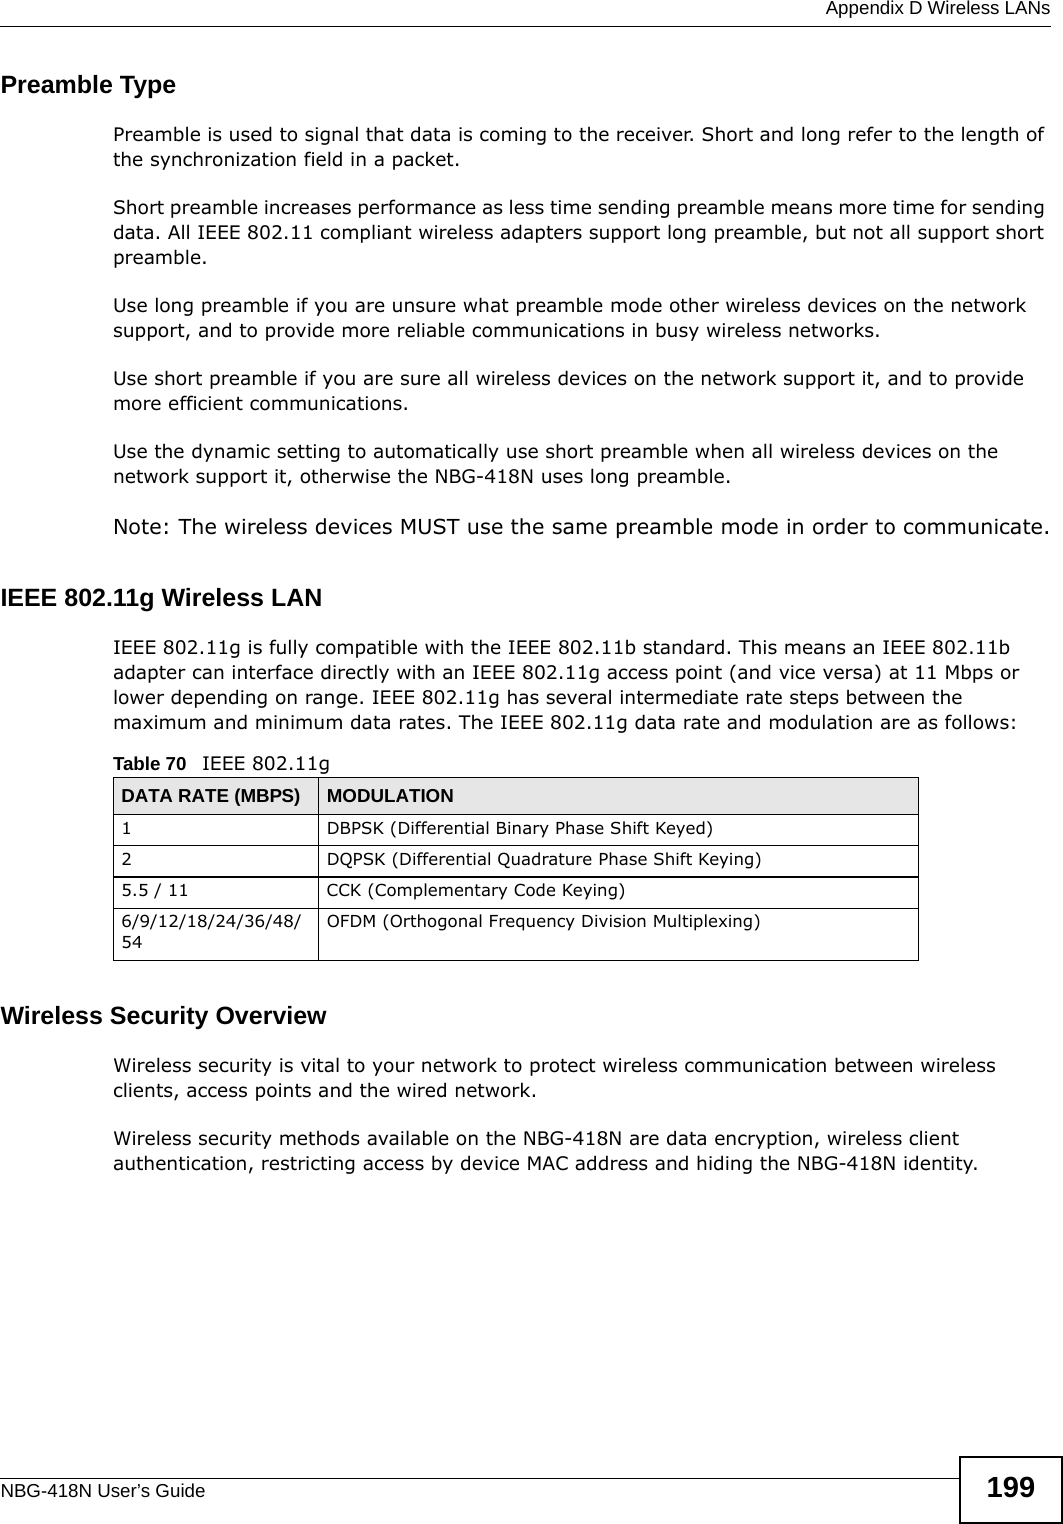  Appendix D Wireless LANsNBG-418N User’s Guide 199Preamble TypePreamble is used to signal that data is coming to the receiver. Short and long refer to the length of the synchronization field in a packet.Short preamble increases performance as less time sending preamble means more time for sending data. All IEEE 802.11 compliant wireless adapters support long preamble, but not all support short preamble. Use long preamble if you are unsure what preamble mode other wireless devices on the network support, and to provide more reliable communications in busy wireless networks. Use short preamble if you are sure all wireless devices on the network support it, and to provide more efficient communications.Use the dynamic setting to automatically use short preamble when all wireless devices on the network support it, otherwise the NBG-418N uses long preamble.Note: The wireless devices MUST use the same preamble mode in order to communicate.IEEE 802.11g Wireless LANIEEE 802.11g is fully compatible with the IEEE 802.11b standard. This means an IEEE 802.11b adapter can interface directly with an IEEE 802.11g access point (and vice versa) at 11 Mbps or lower depending on range. IEEE 802.11g has several intermediate rate steps between the maximum and minimum data rates. The IEEE 802.11g data rate and modulation are as follows:Wireless Security OverviewWireless security is vital to your network to protect wireless communication between wireless clients, access points and the wired network.Wireless security methods available on the NBG-418N are data encryption, wireless client authentication, restricting access by device MAC address and hiding the NBG-418N identity.Table 70   IEEE 802.11gDATA RATE (MBPS) MODULATION1 DBPSK (Differential Binary Phase Shift Keyed)2 DQPSK (Differential Quadrature Phase Shift Keying)5.5 / 11 CCK (Complementary Code Keying) 6/9/12/18/24/36/48/54OFDM (Orthogonal Frequency Division Multiplexing) 